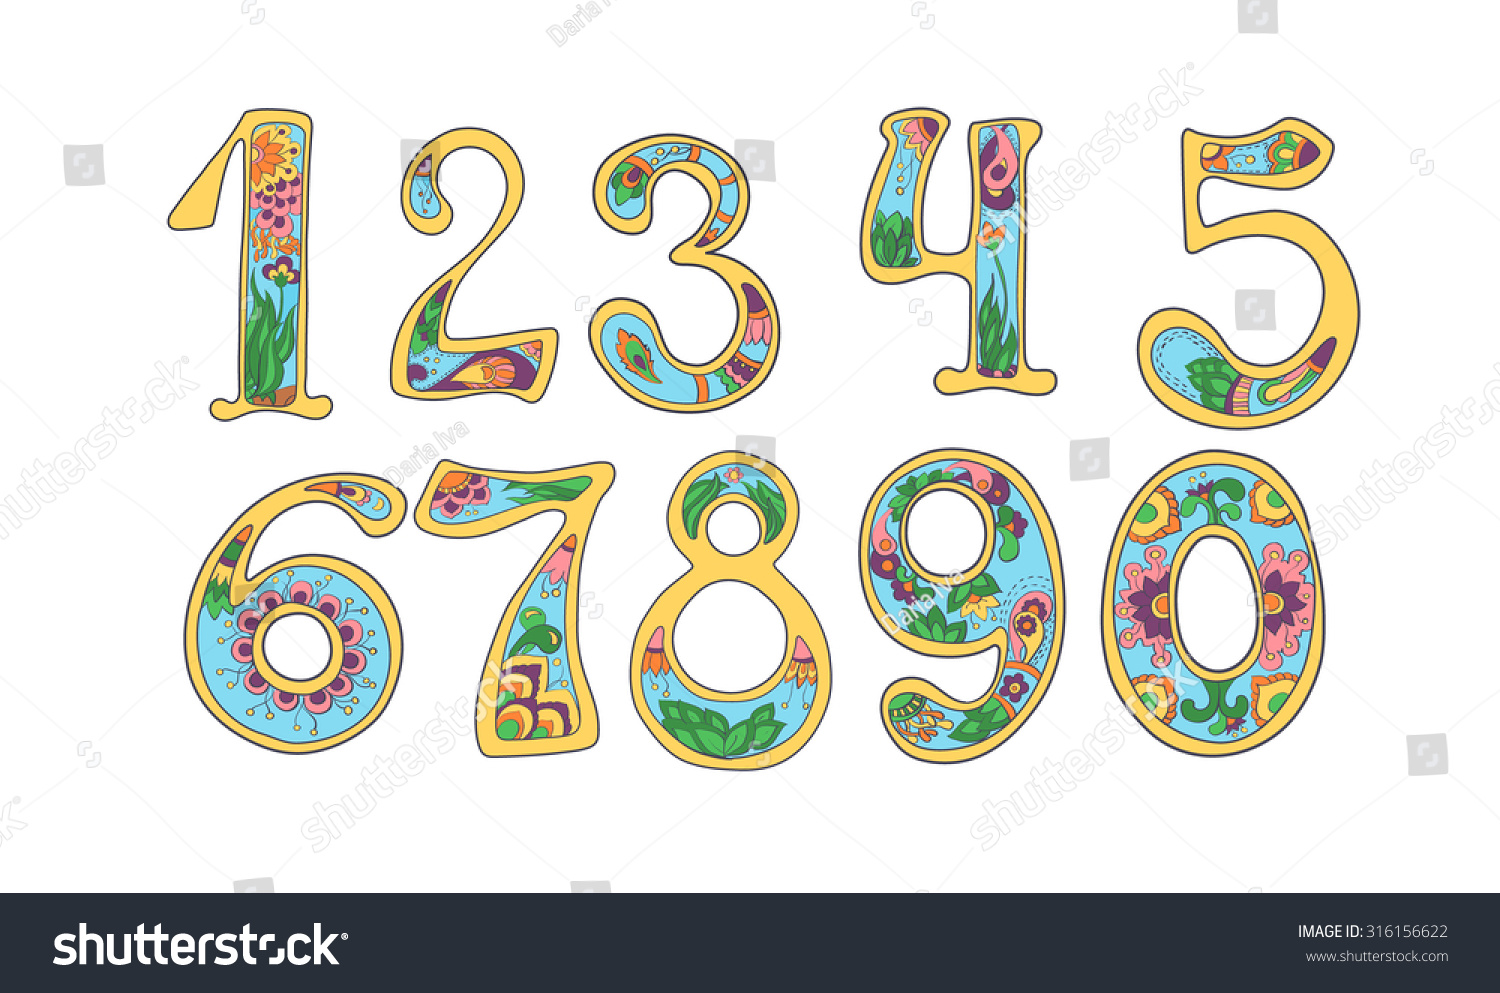 fancy numbers clipart - photo #32